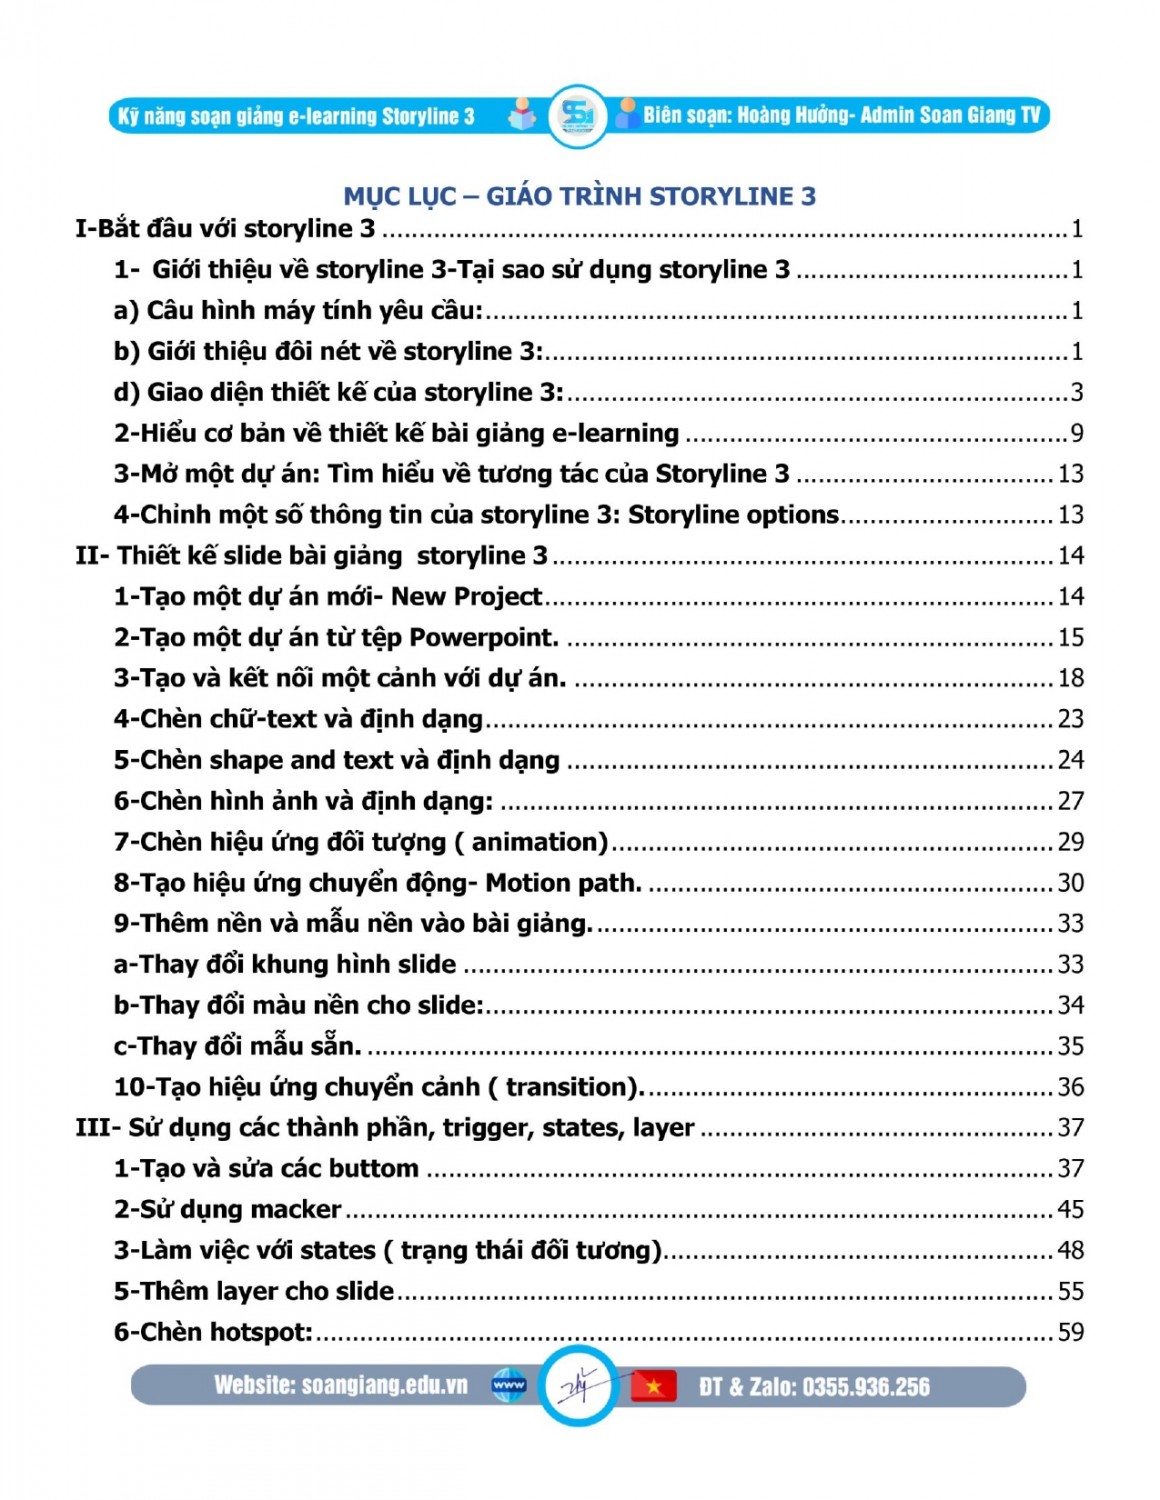 GIAO TRINH KY NANG E LEARNING STORYLINE 3 PDF pages to jpg 0002